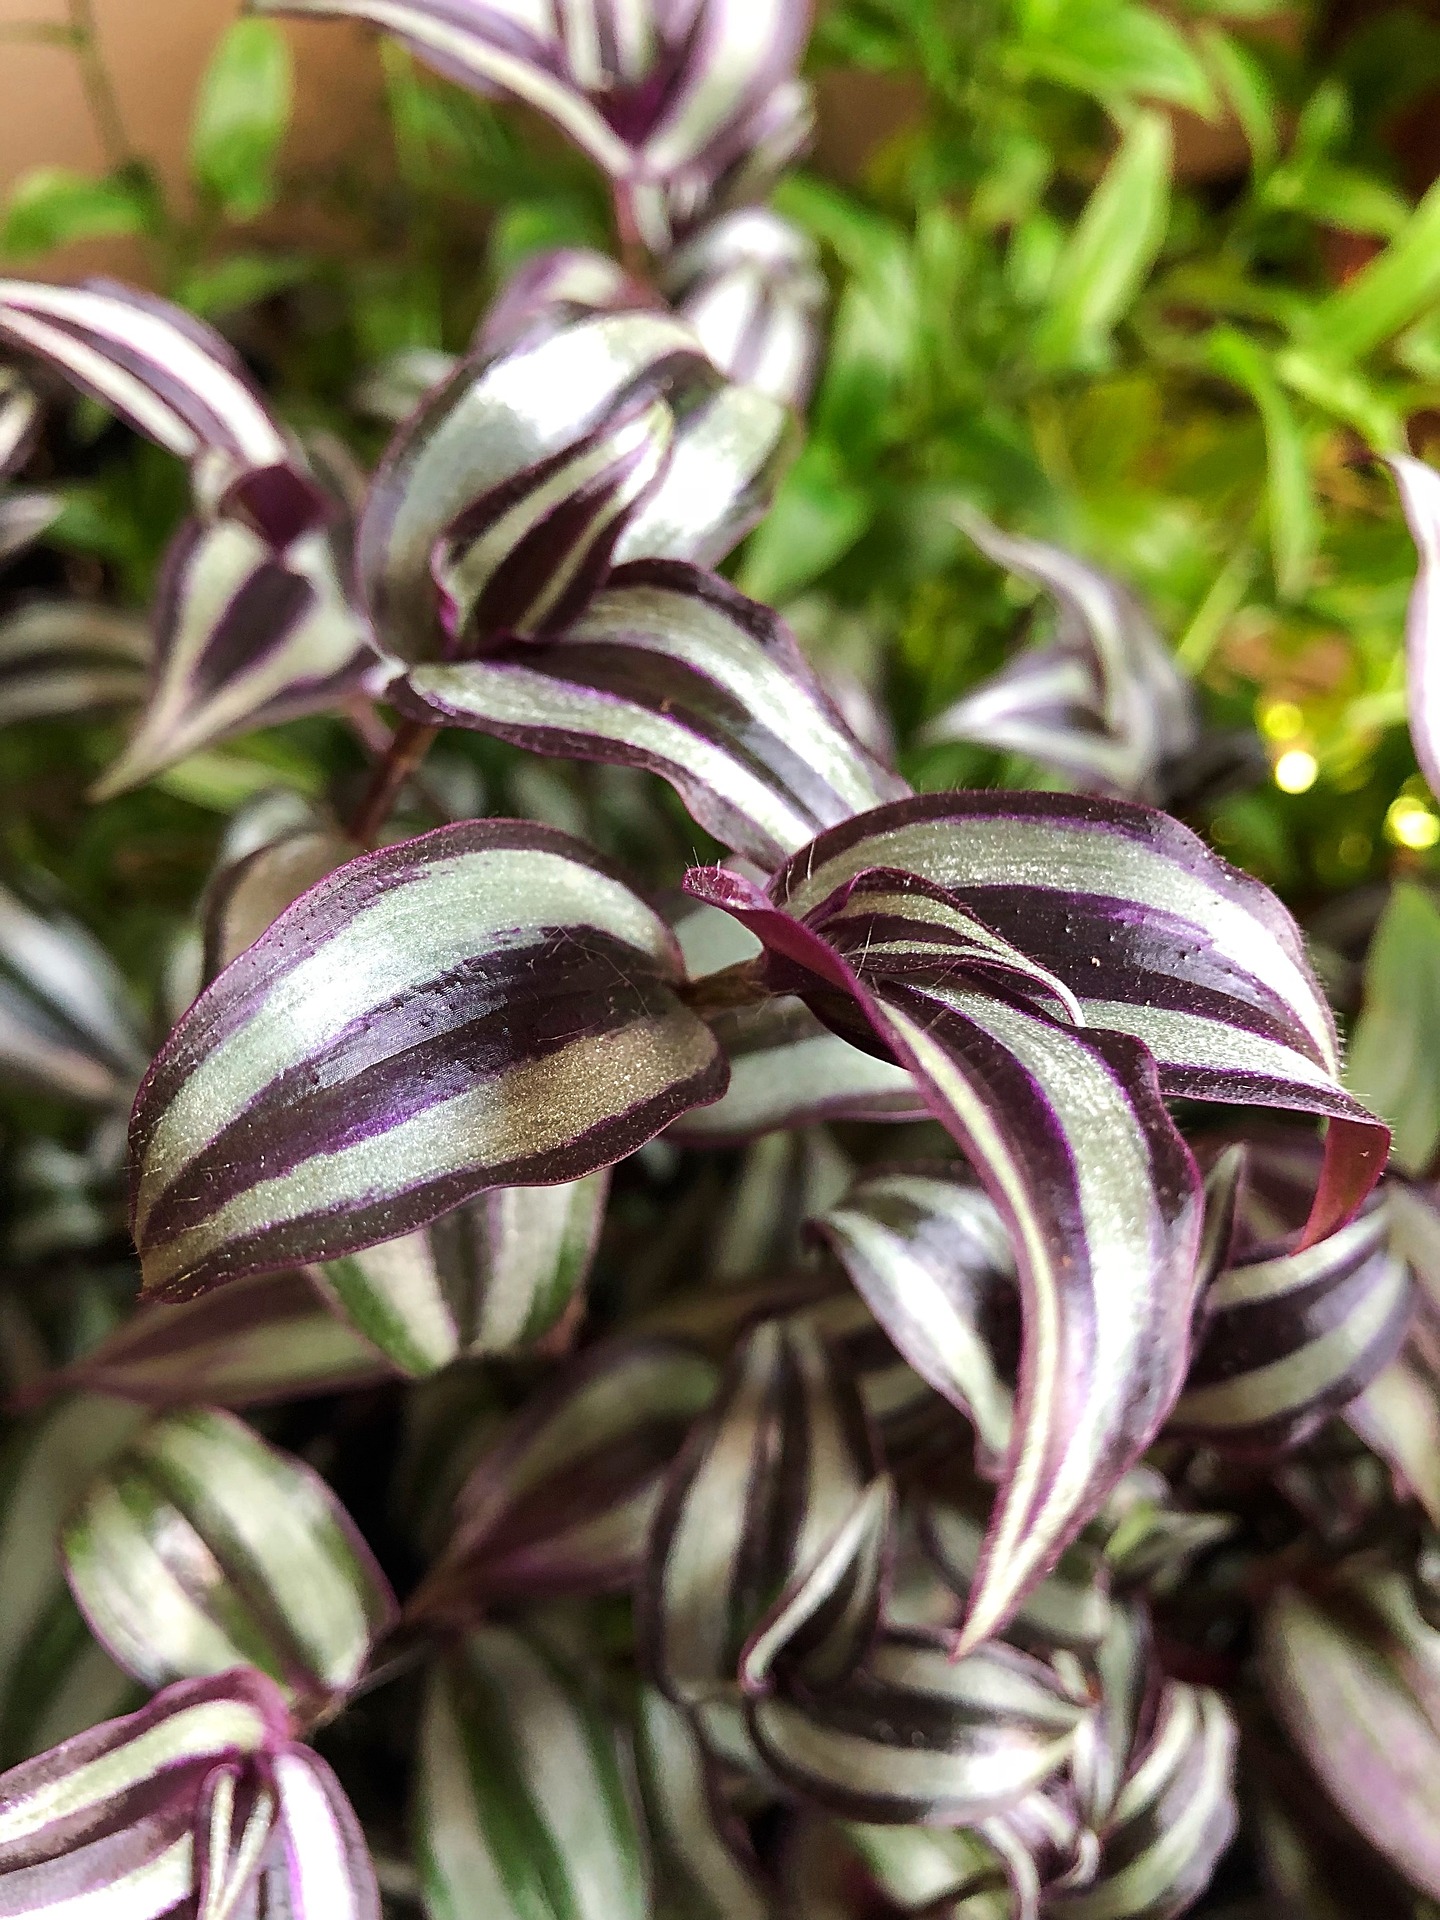 can you propagate wandering jew plant